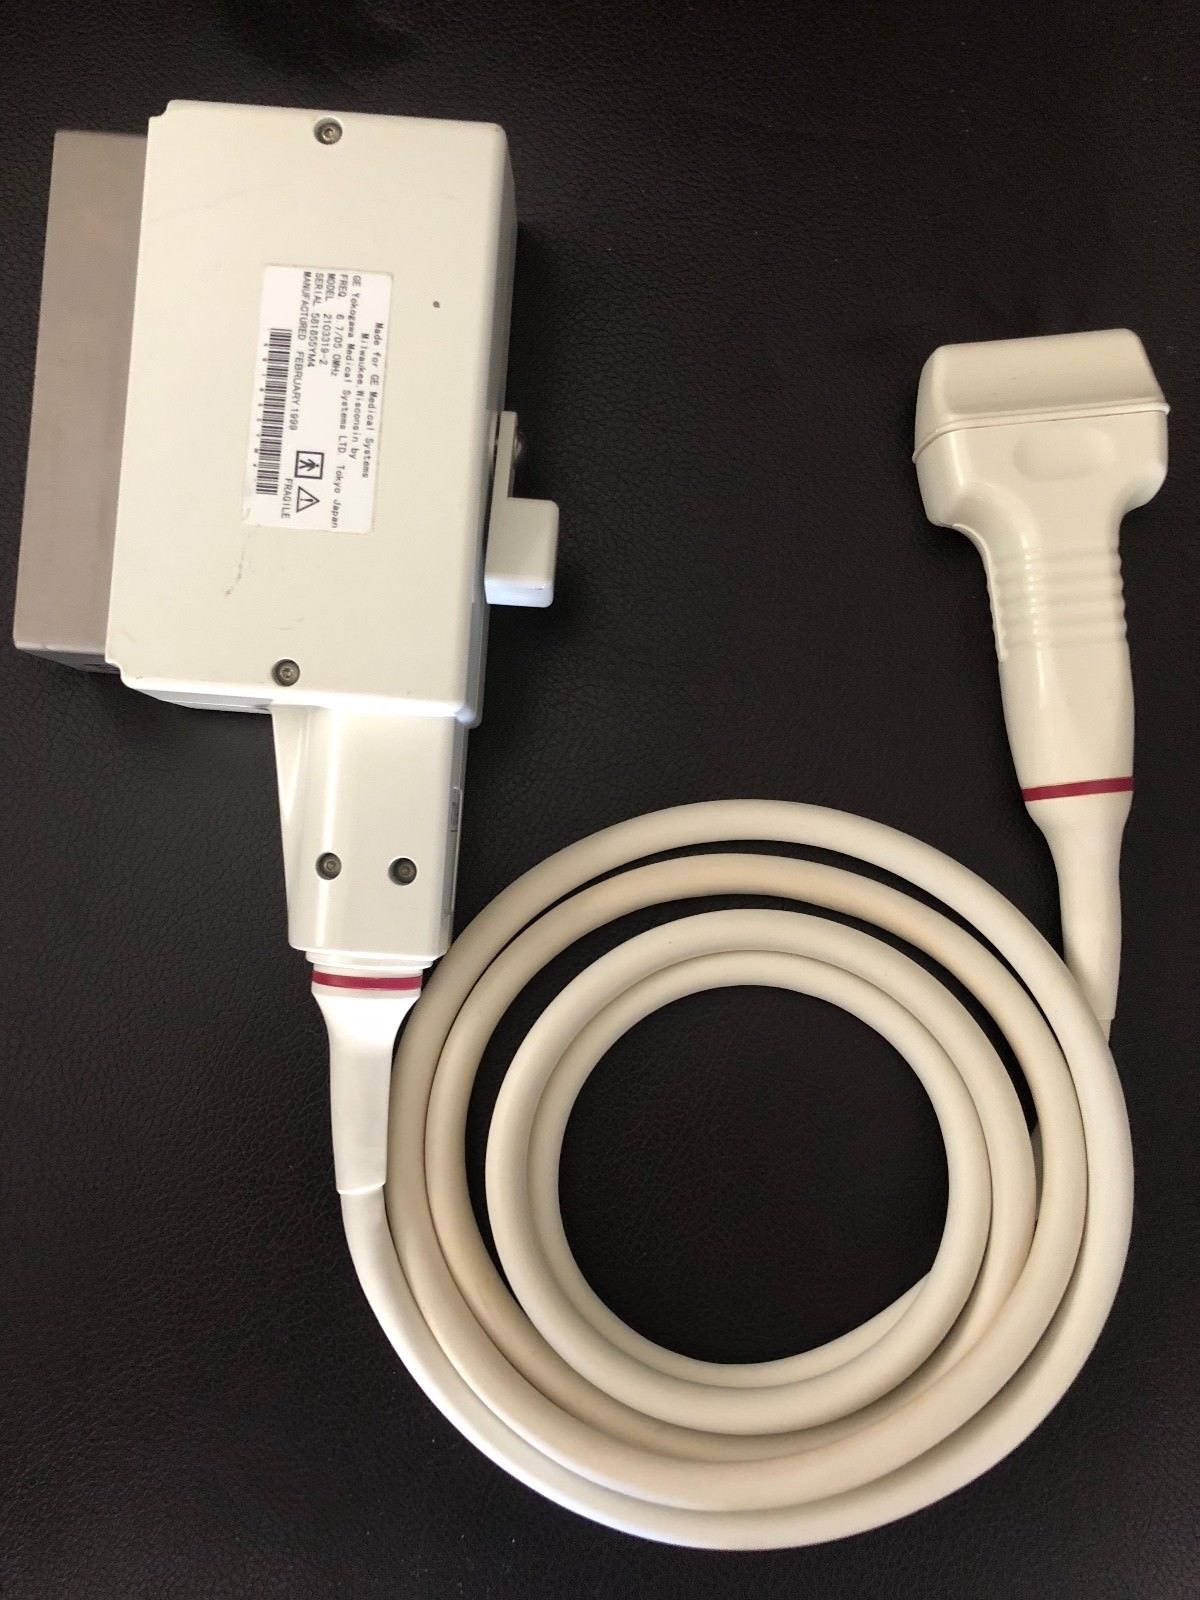 GE 739L OR 10L LINEAR PROBE FOR LOGIQ 400/500/700/5/7/9/P5/S6 AND VIVID 7 DIAGNOSTIC ULTRASOUND MACHINES FOR SALE